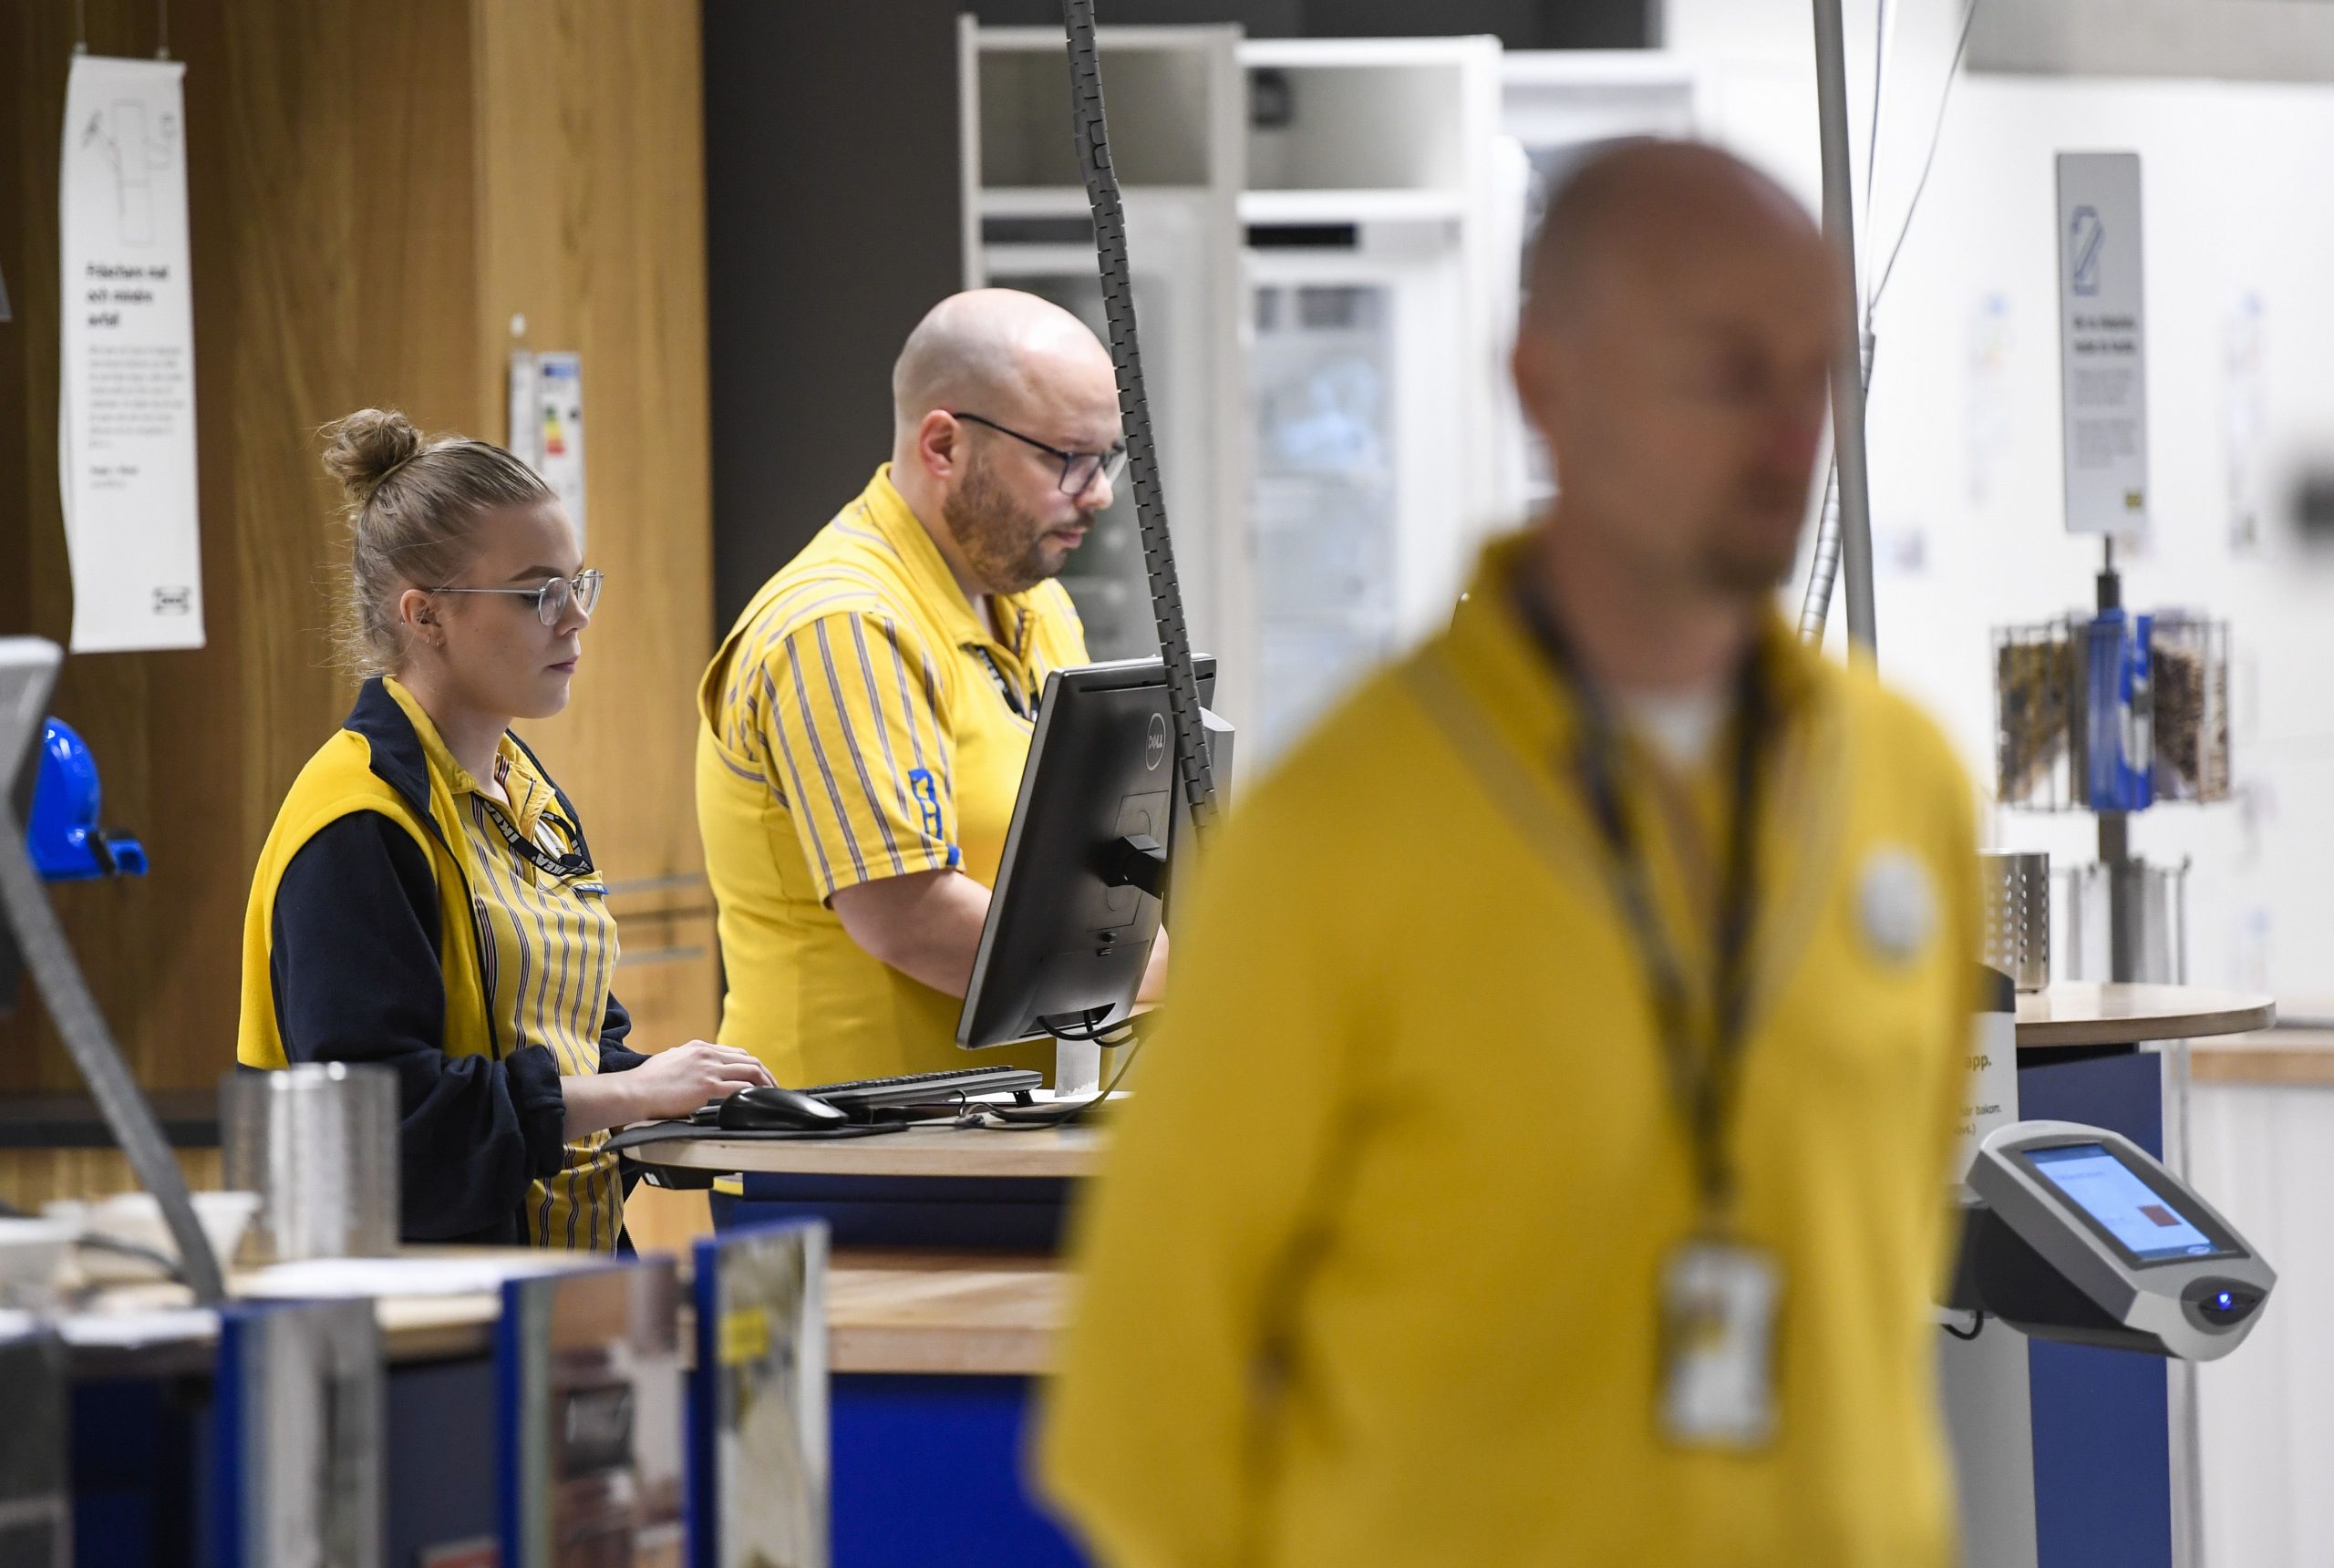 Working at IKEA Australia: Join Our Logistics Team